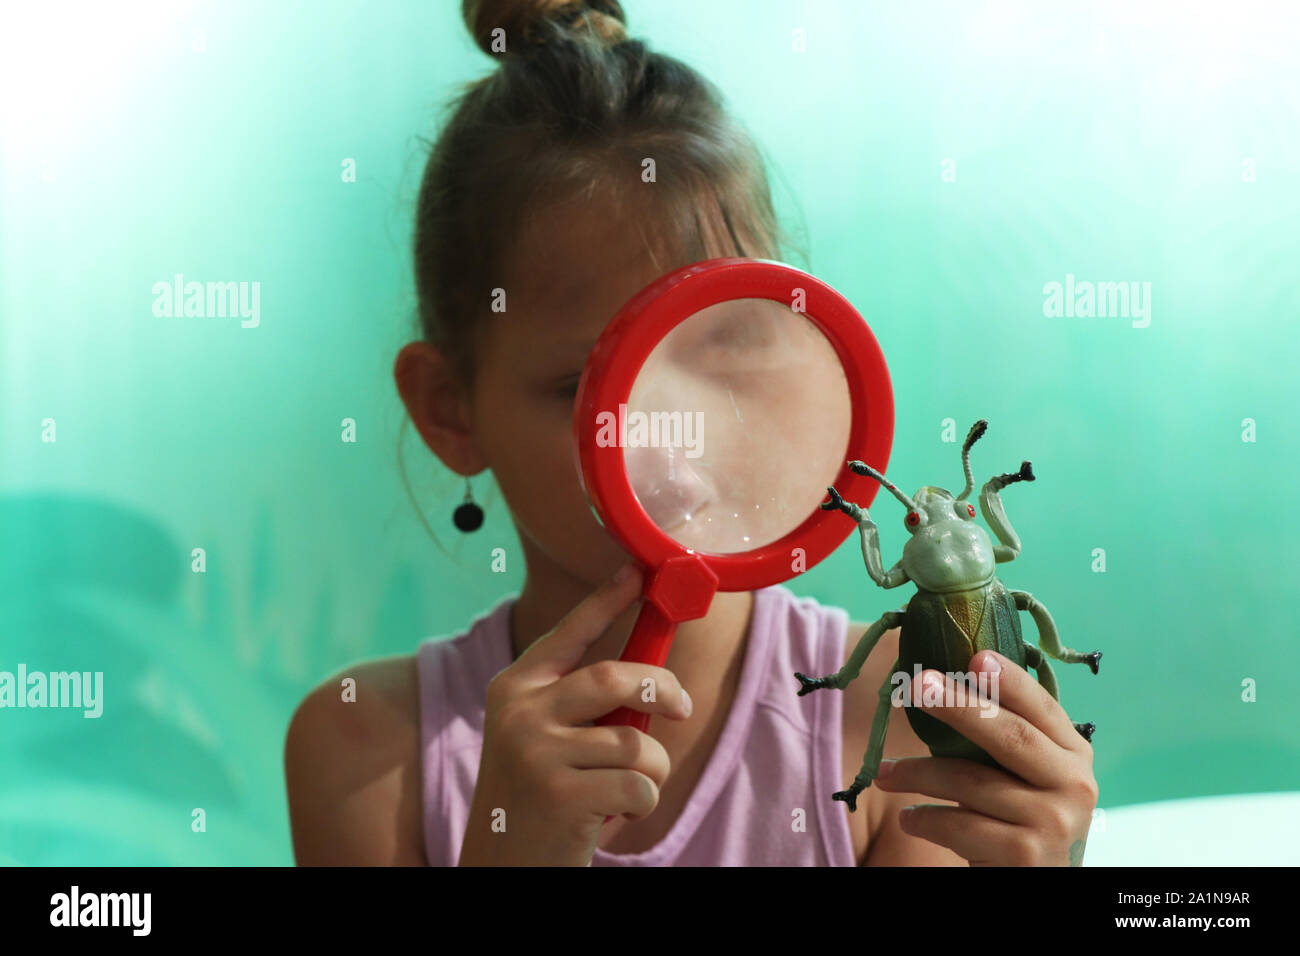 Child studying a toy buy through a magnifying glass Stock Photo